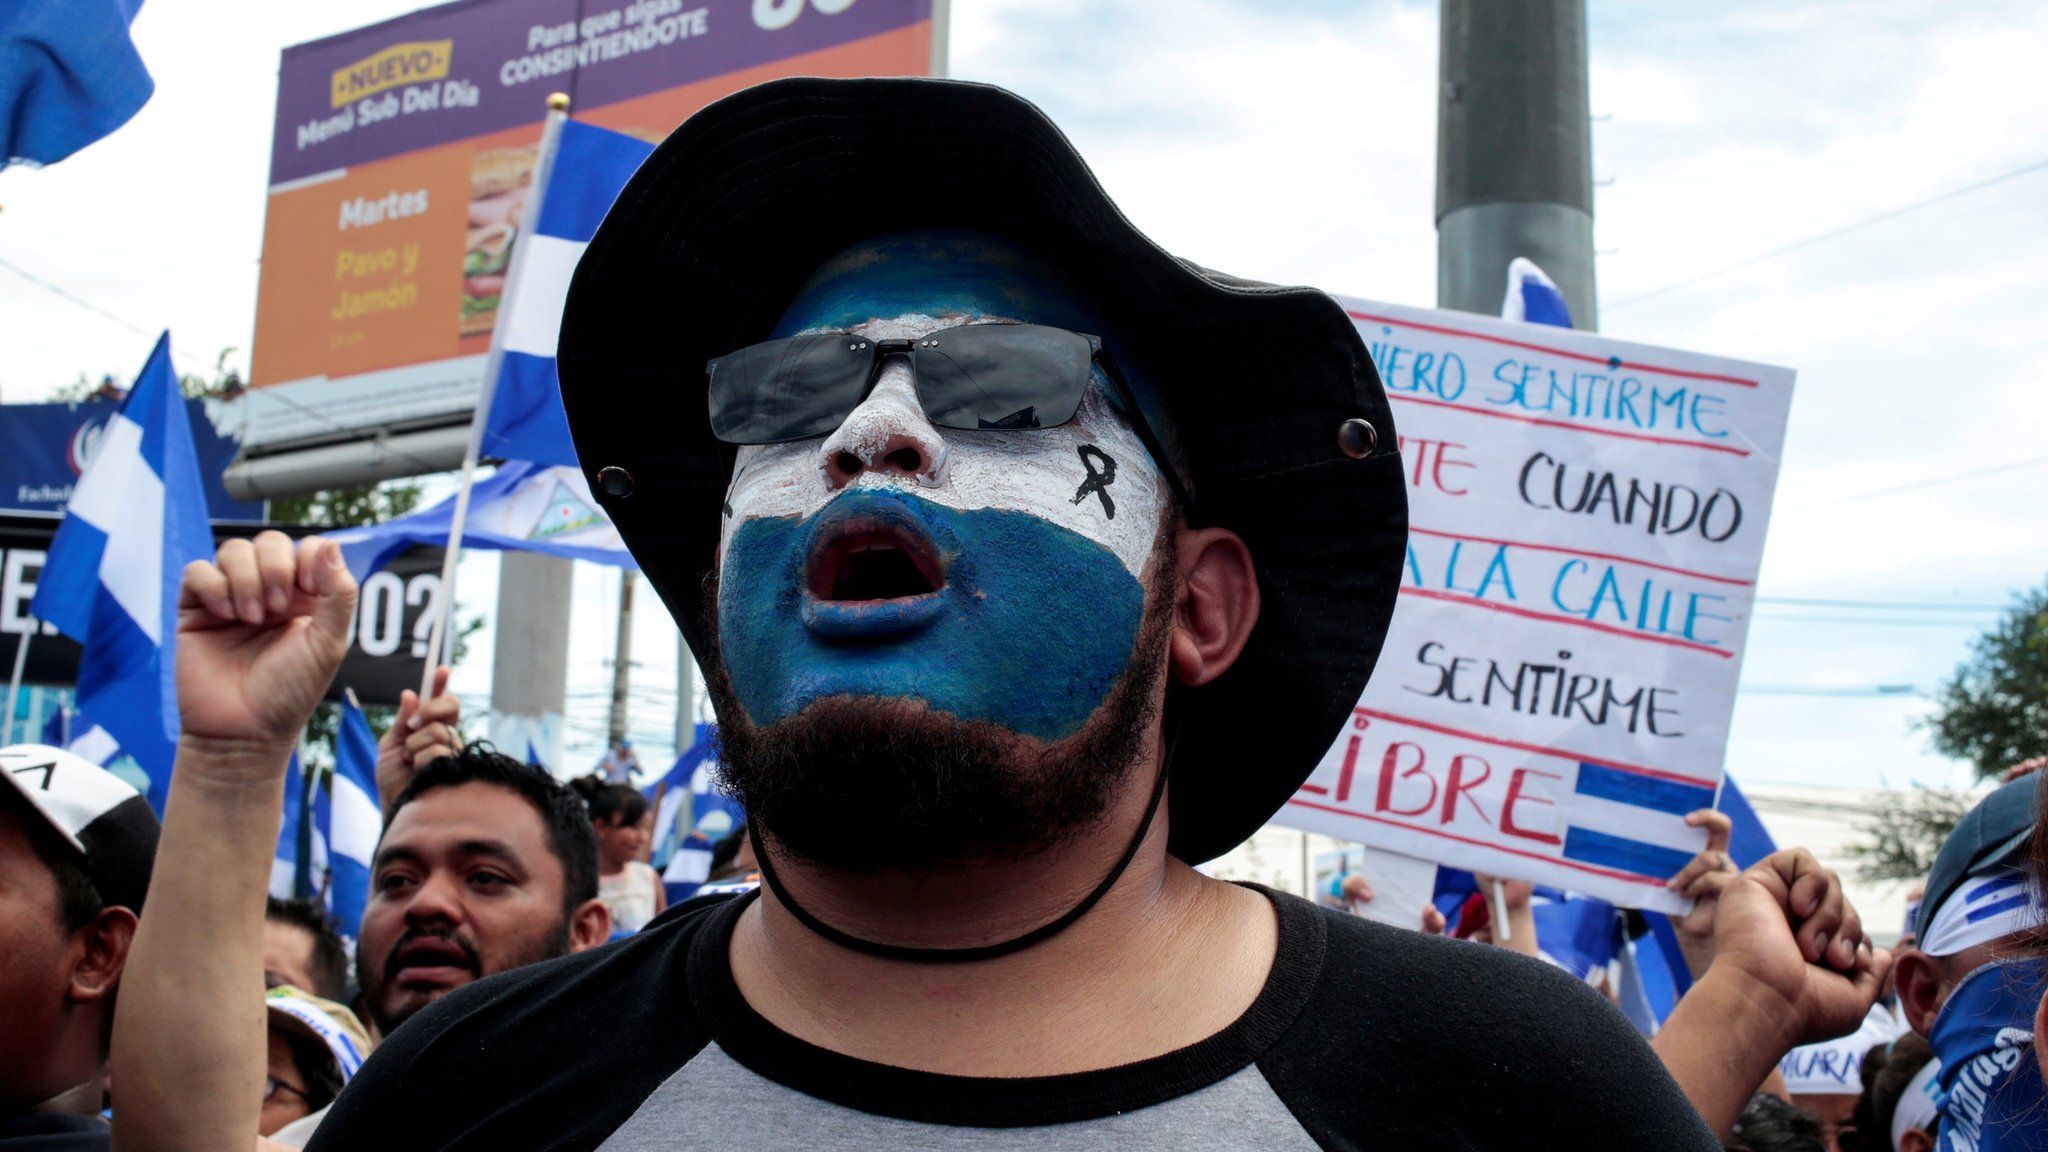 A demonstrator with the colours of the national flag painted on her face takes part in a protest against Nicaraguan President Daniel Ortega's government in Managua, Nicaragua May 30, 2018